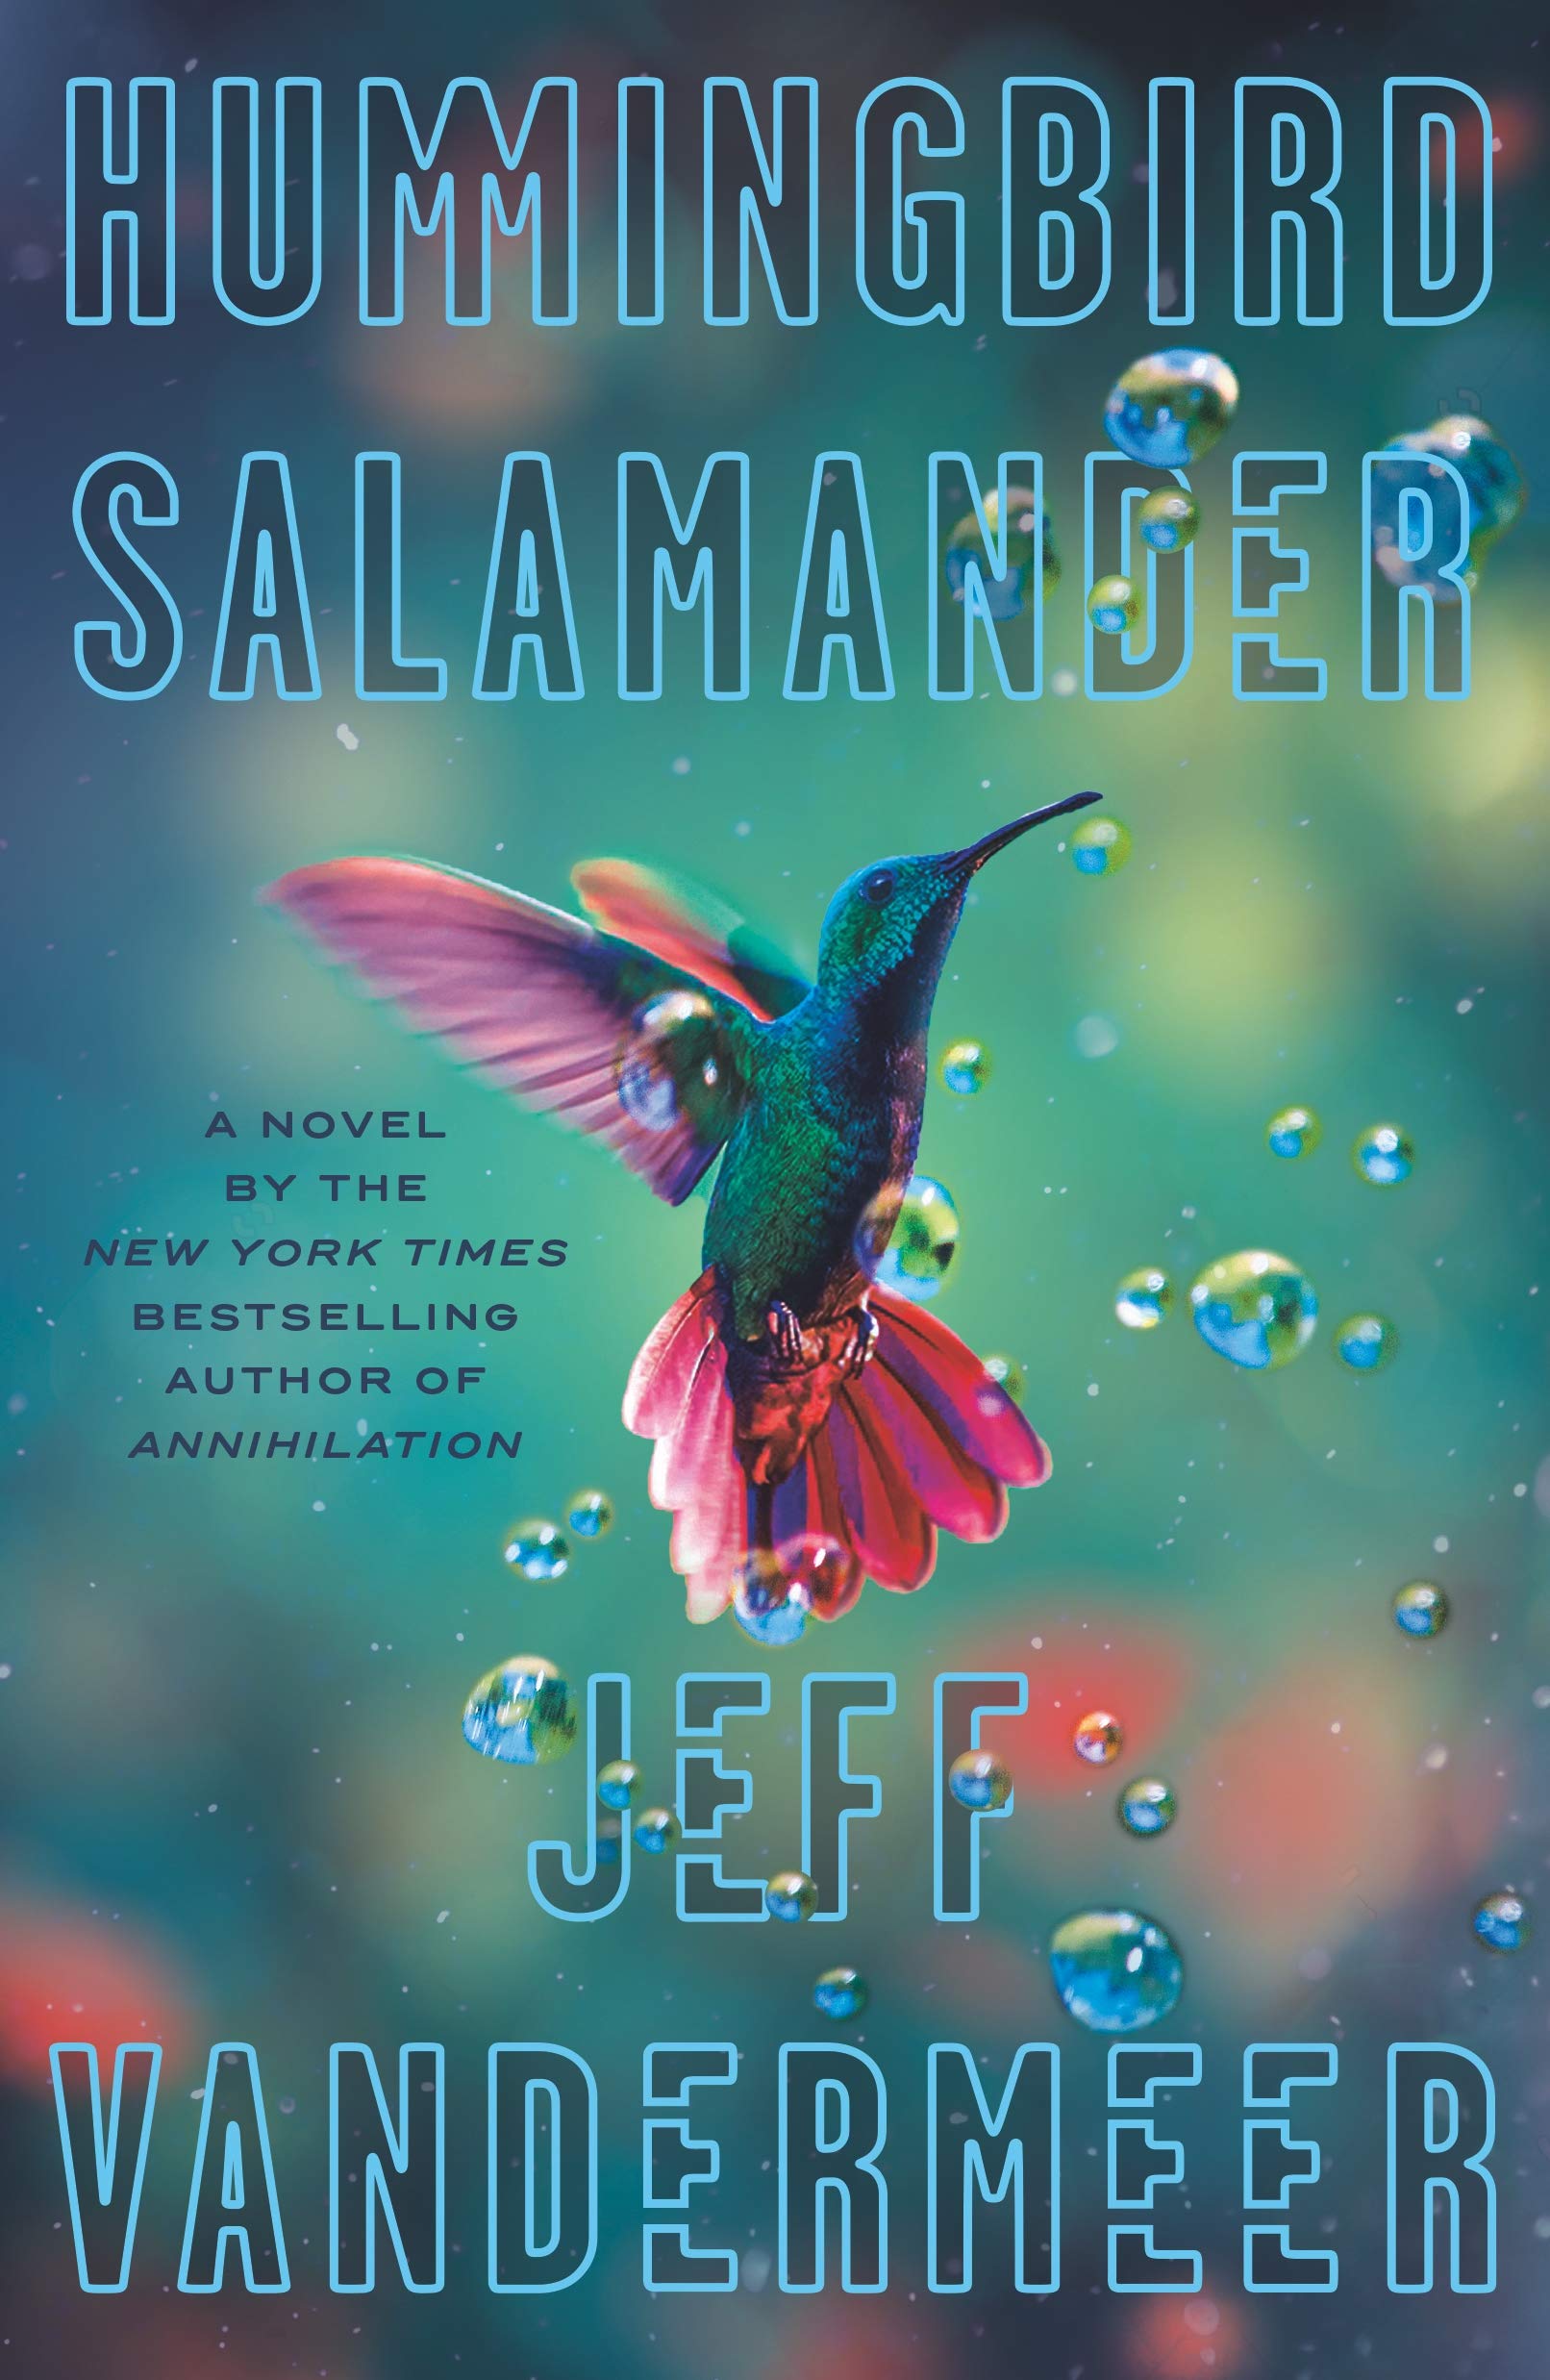 Discover the Intrigue of the Hummingbird Salamander Netflix Series - Uncover the Secrets! 18